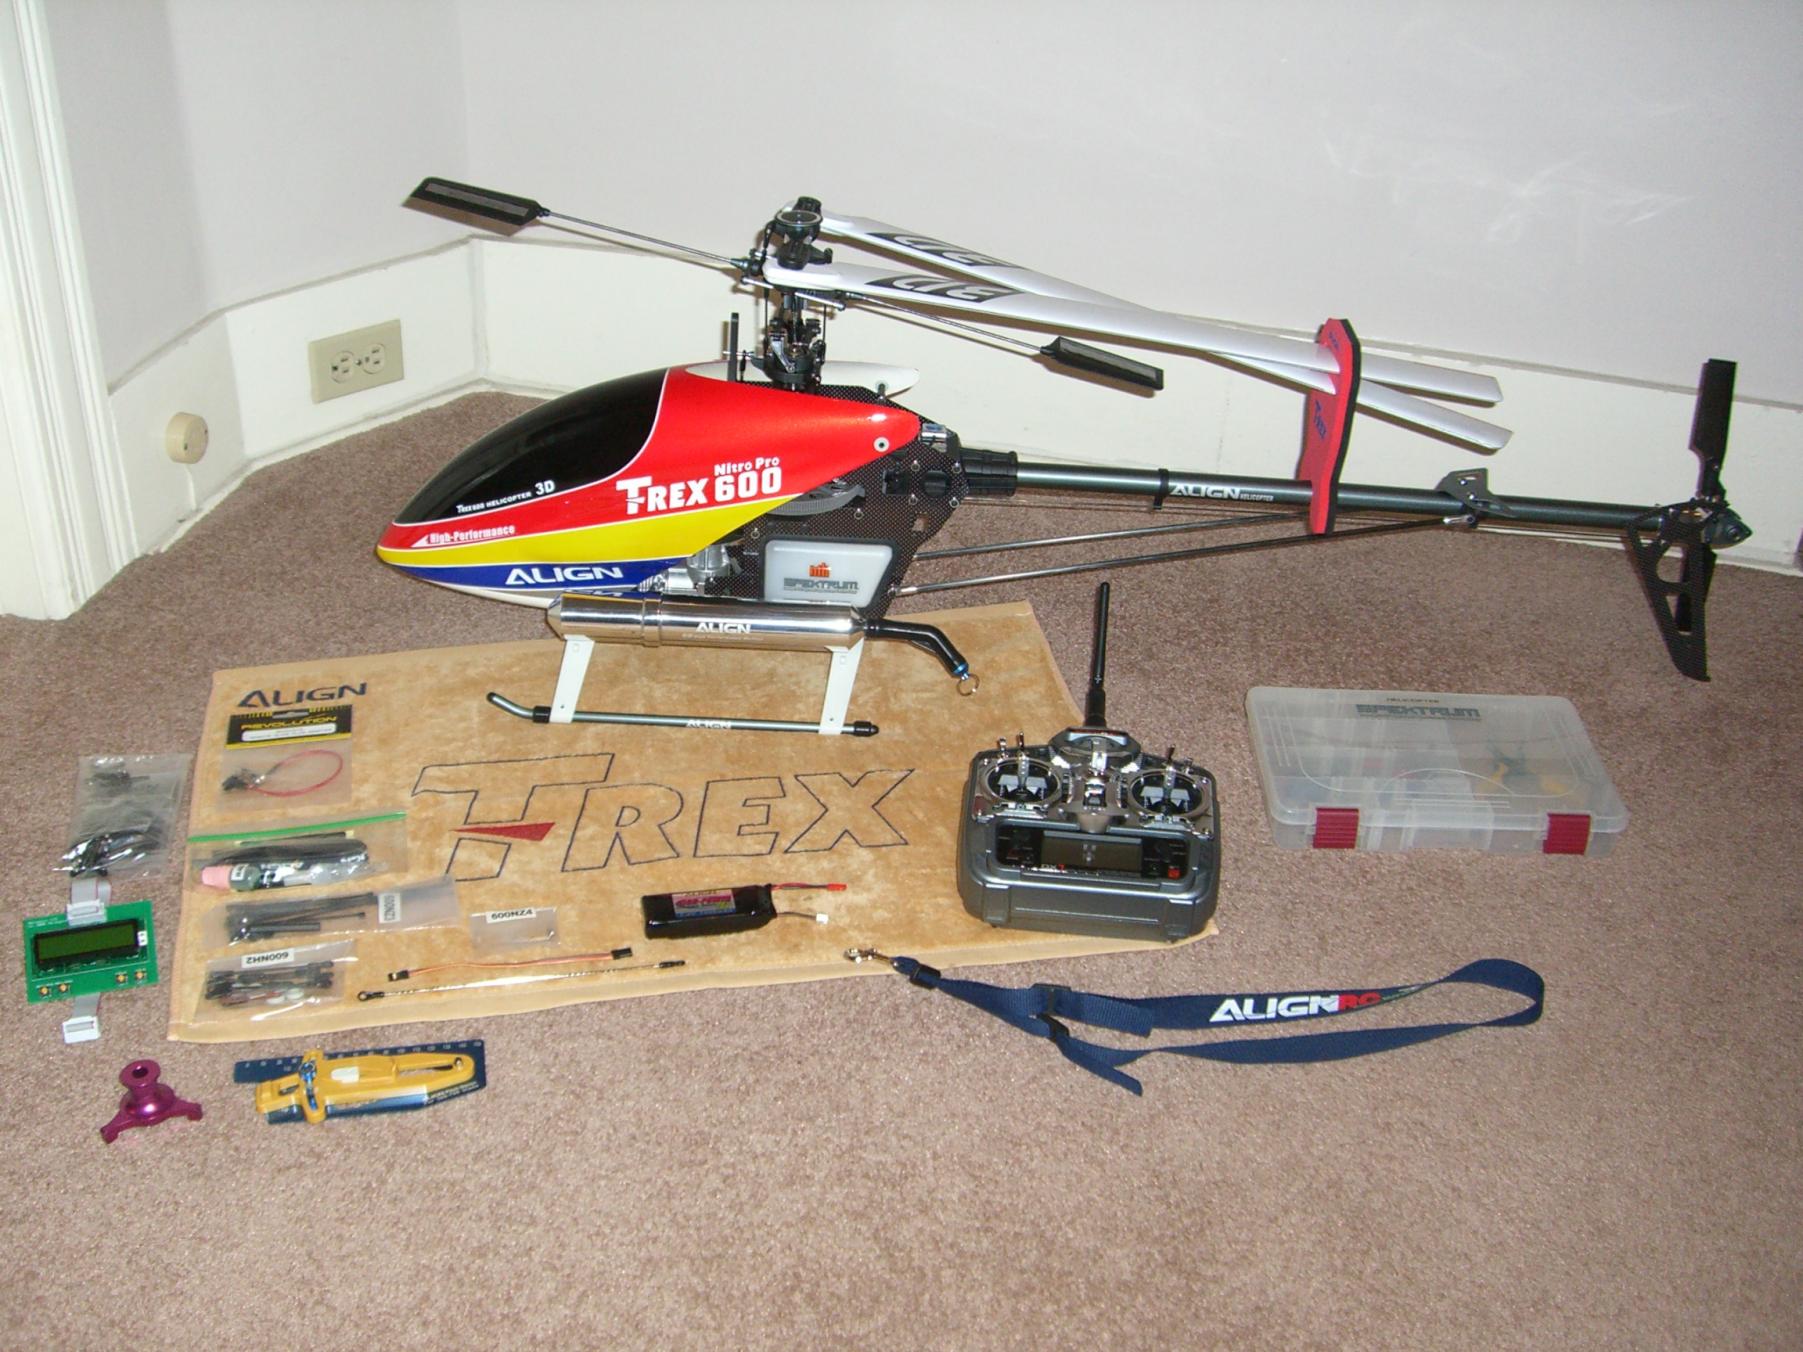 trex 600 rc helicopter price